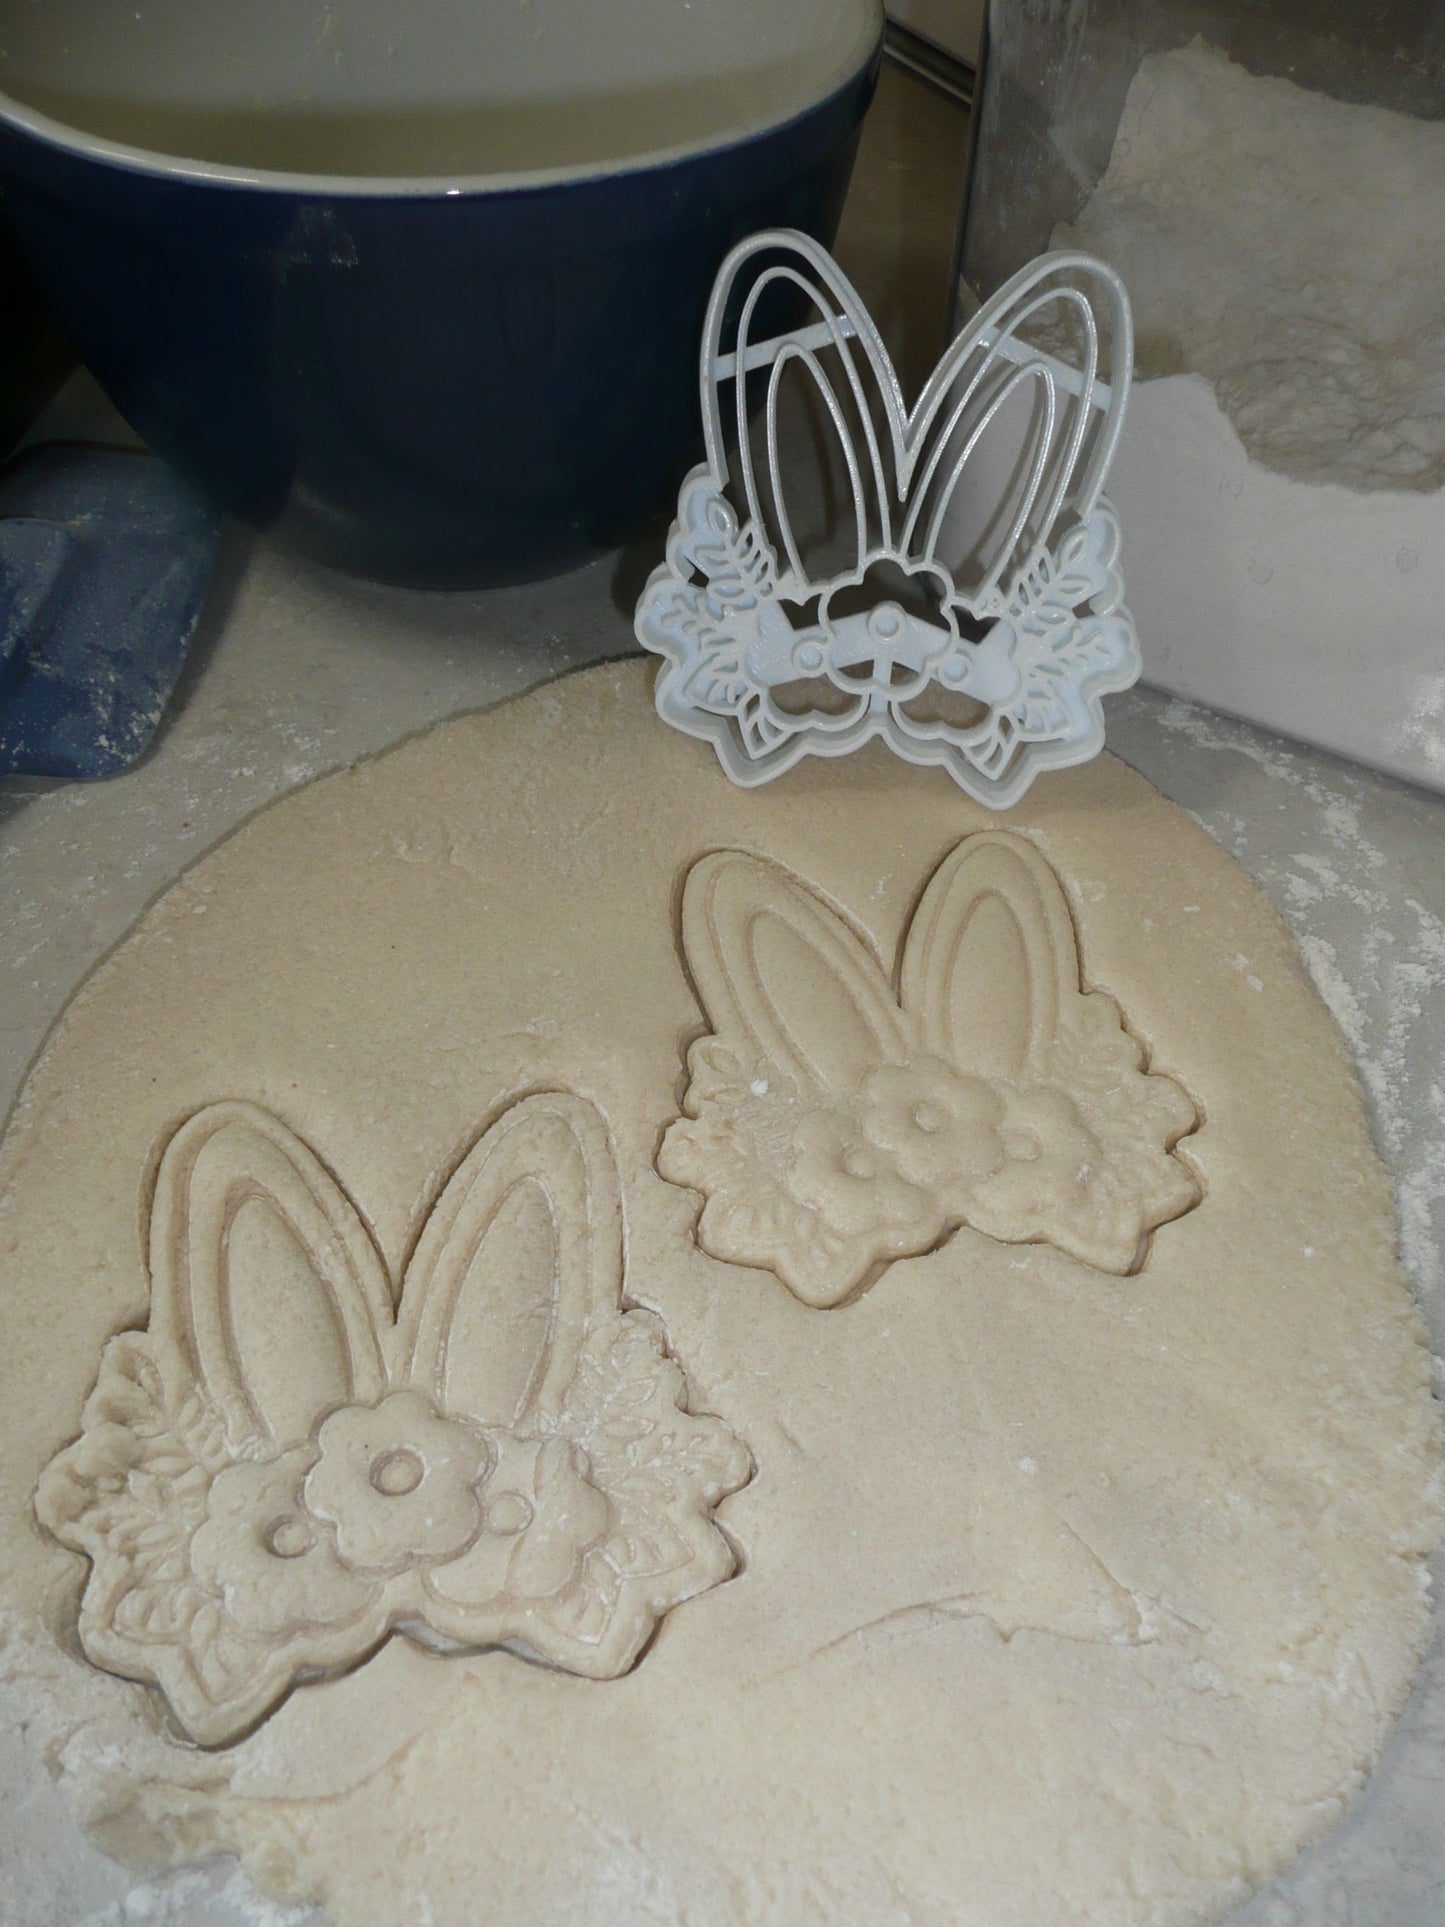 Floral Bunny Ears Flower Rabbit Easter Spring Cookie Cutter USA PR3452